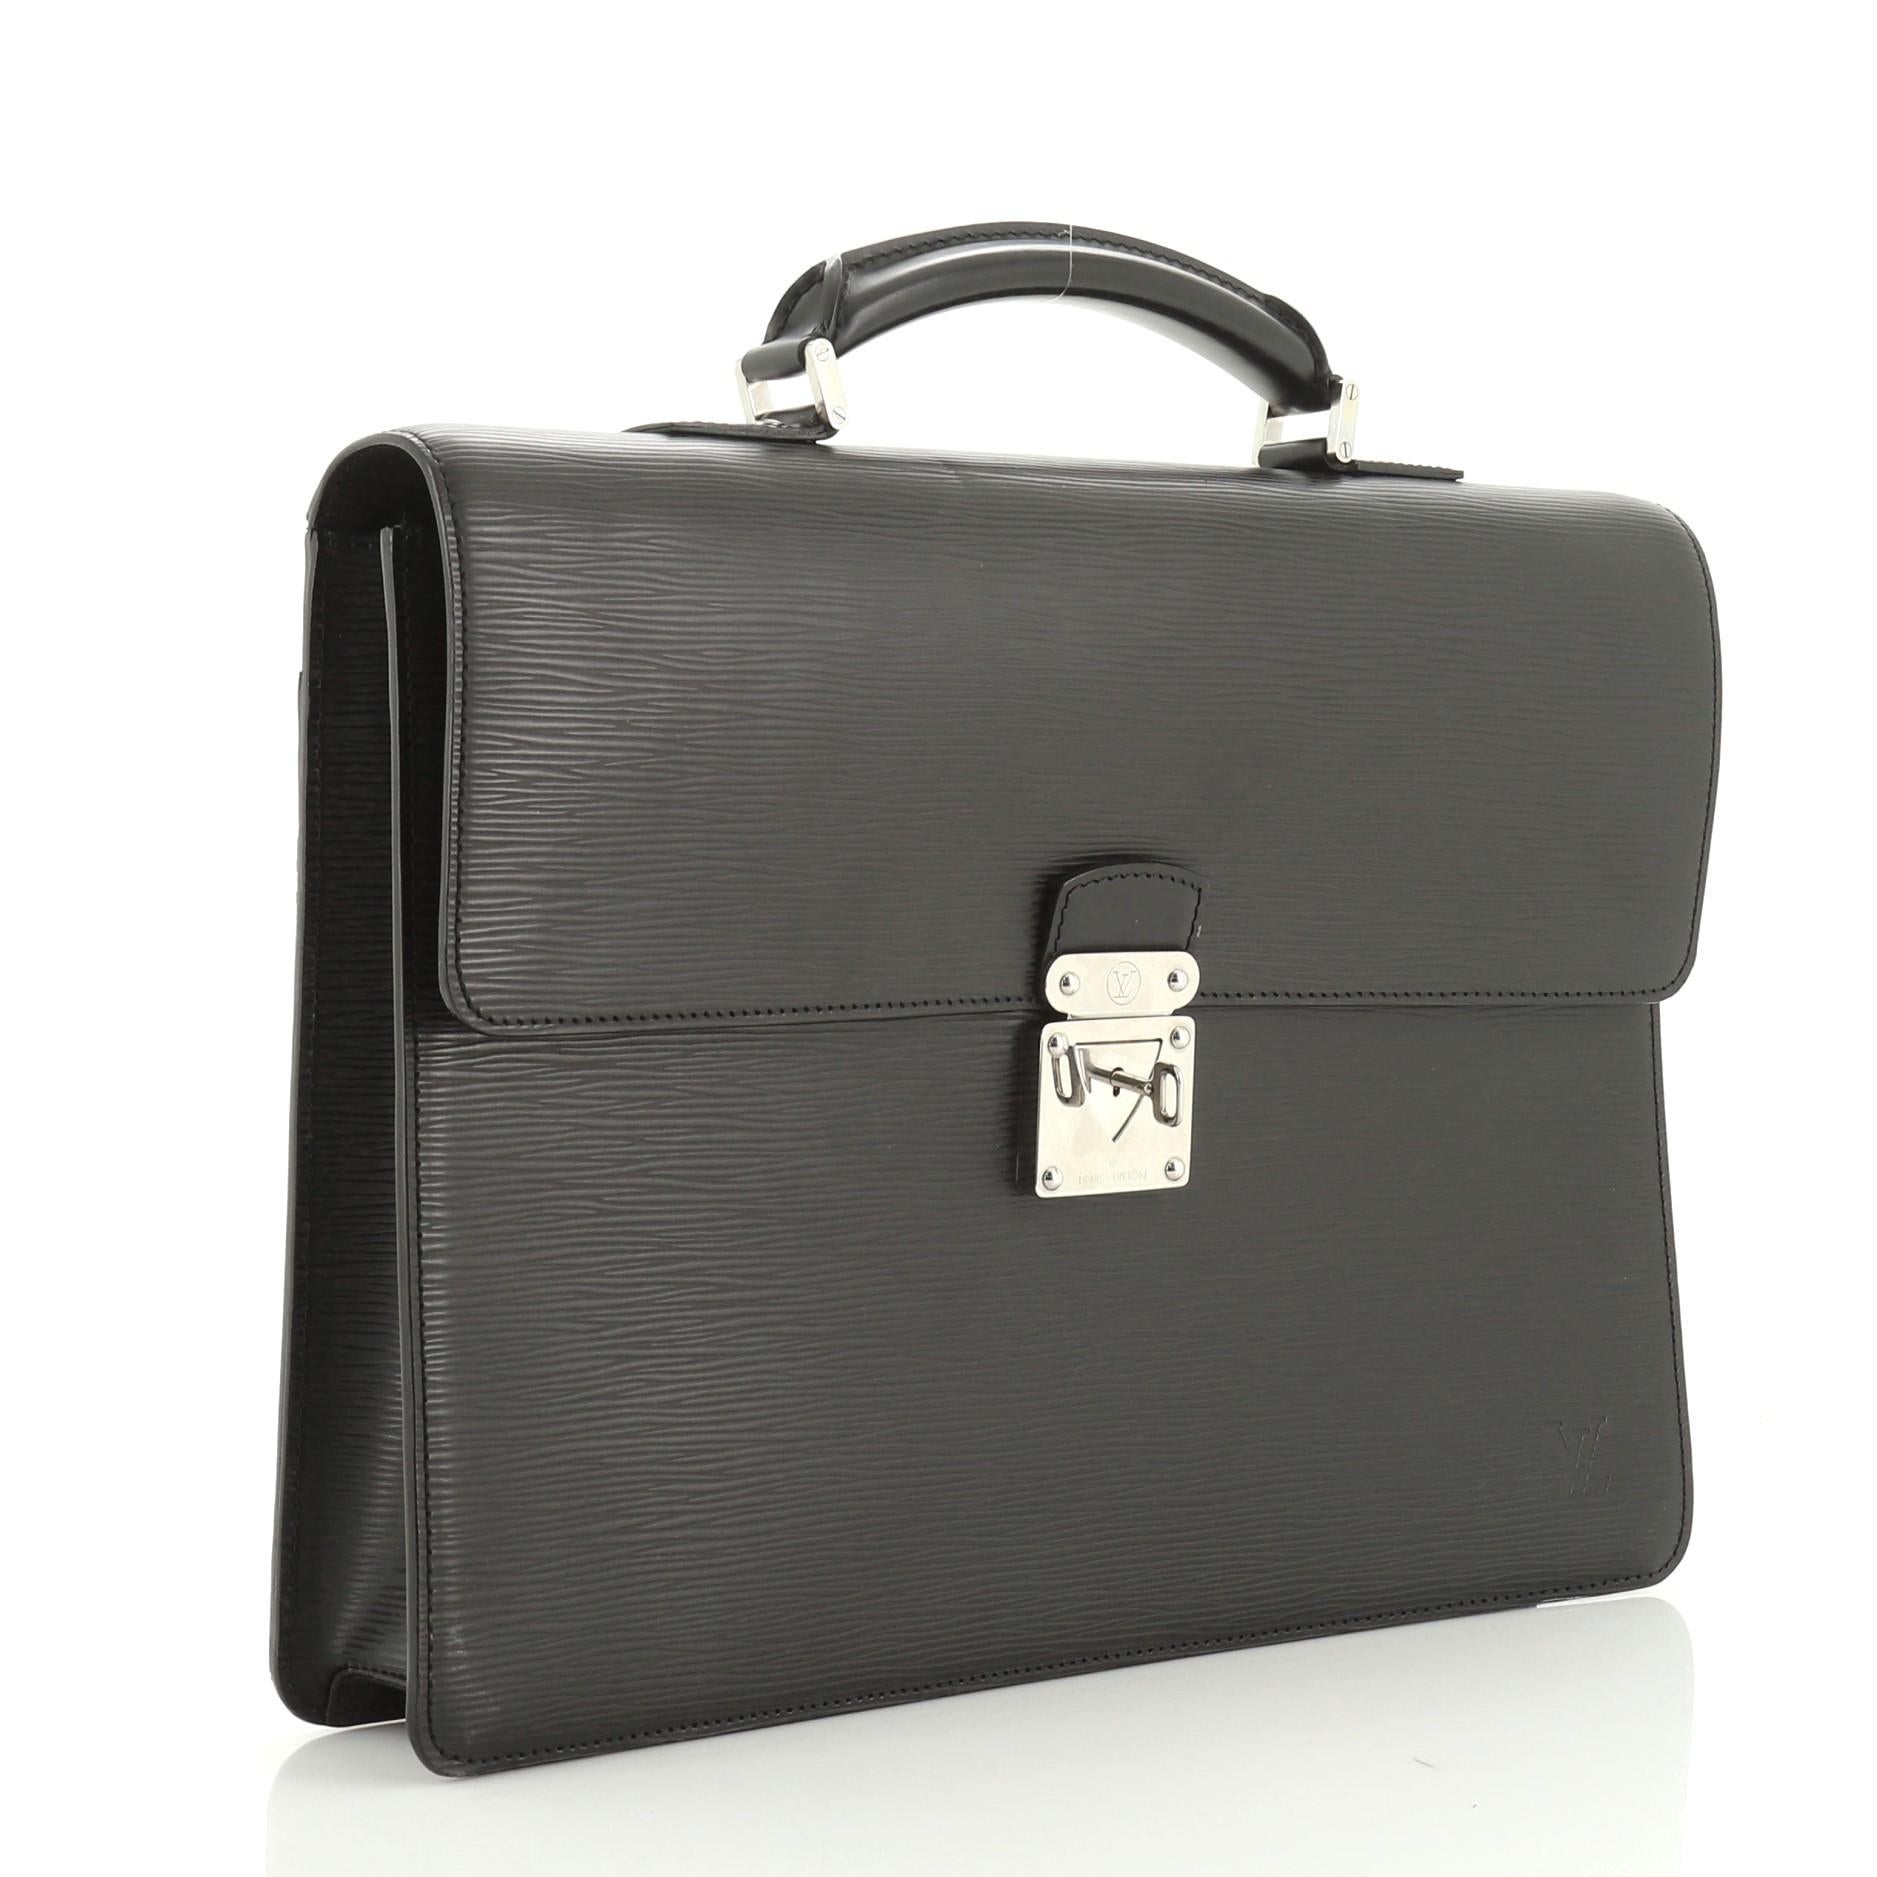 This Louis Vuitton Neo Robusto 1 Briefcase Epi Leather, crafted in black epi leather, features rolled leather top handle with links, gusseted sides, exterior back pocket and silver-tone hardware. Its S-lock closure opens to a black fabric interior